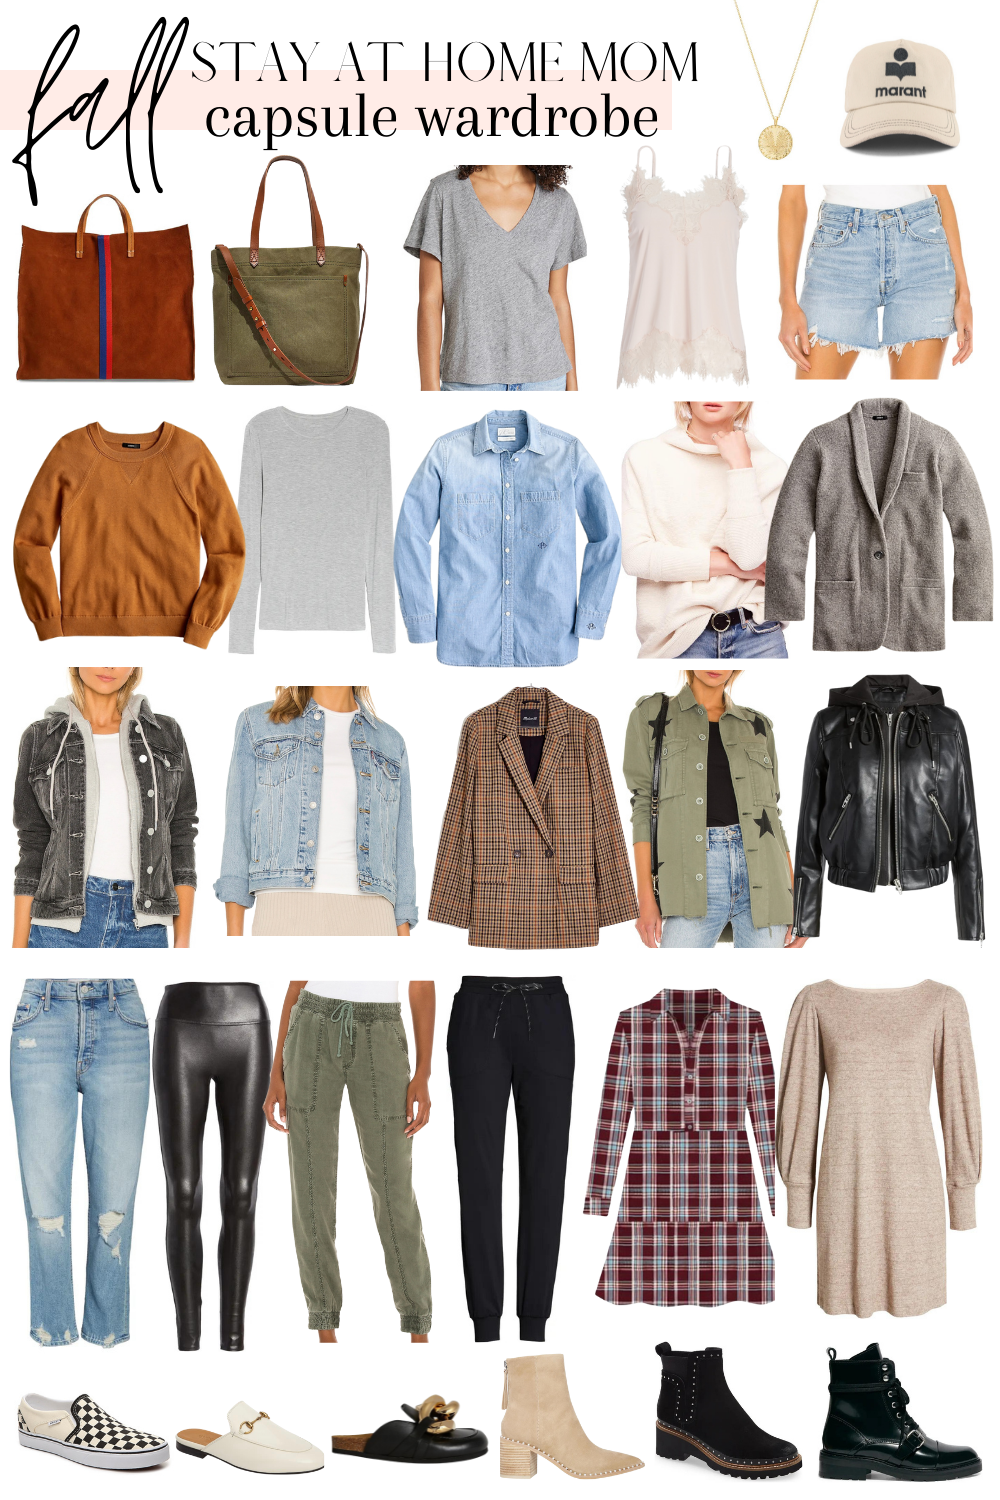 Stay At Home Mom Fall Capsule Wardrobe - My Kind of Sweet